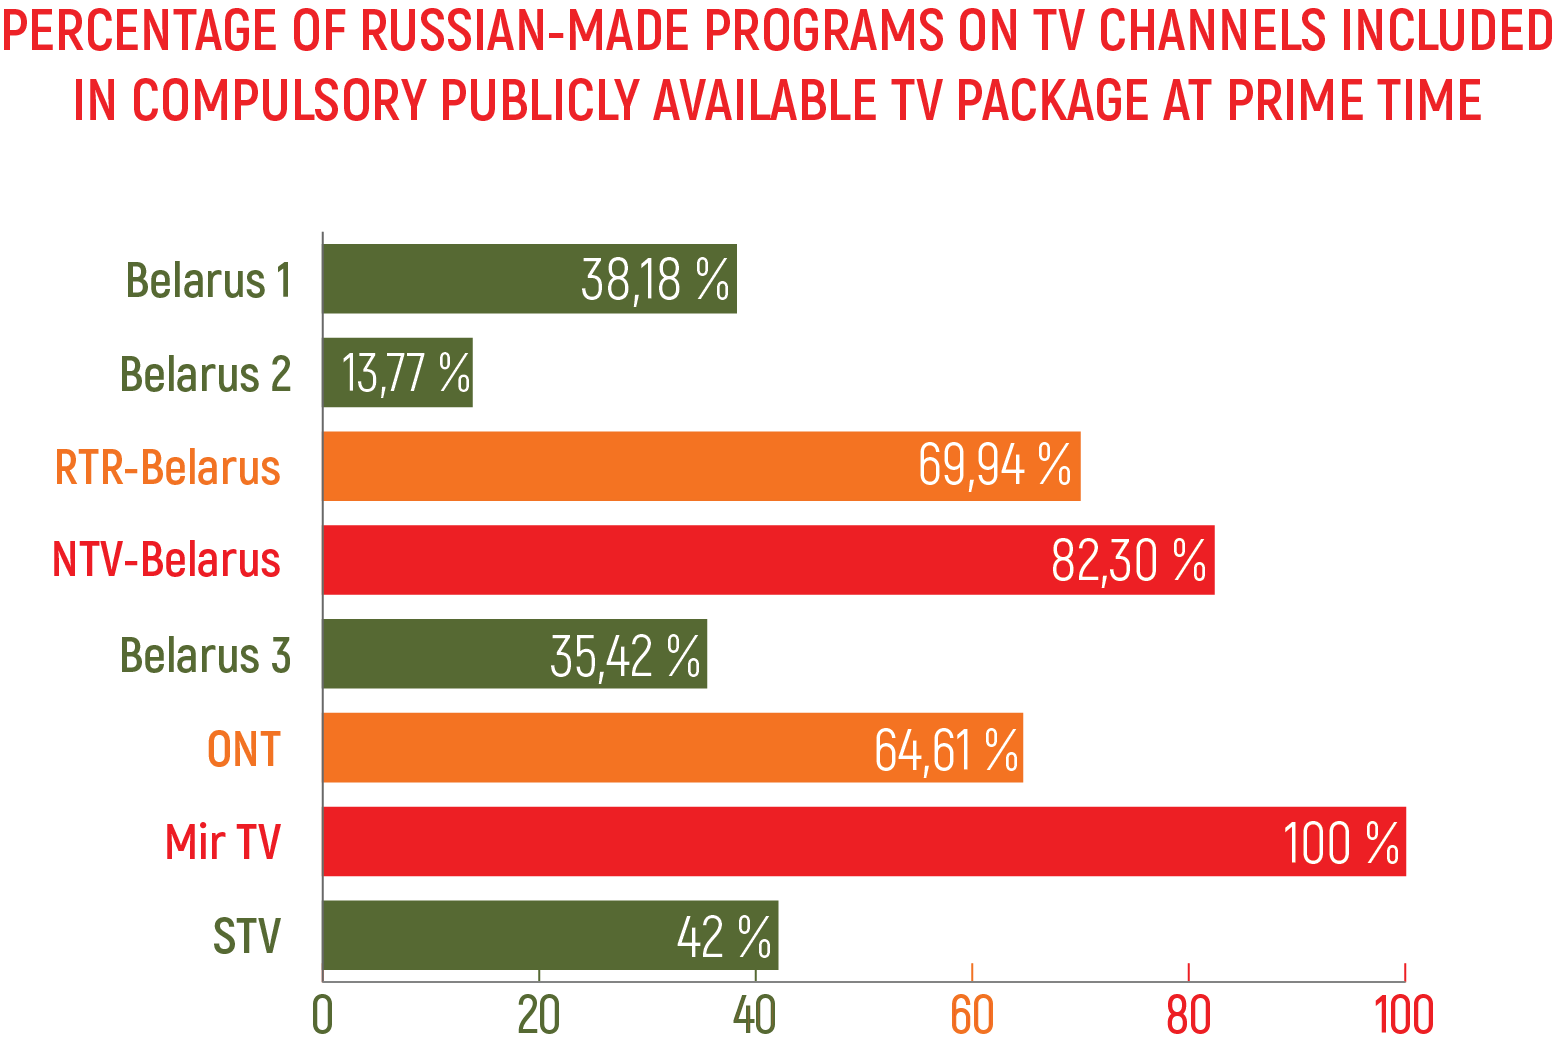 Percentage of Russian-made programs on TV channels included in compulsory publicly available TV package at prime time